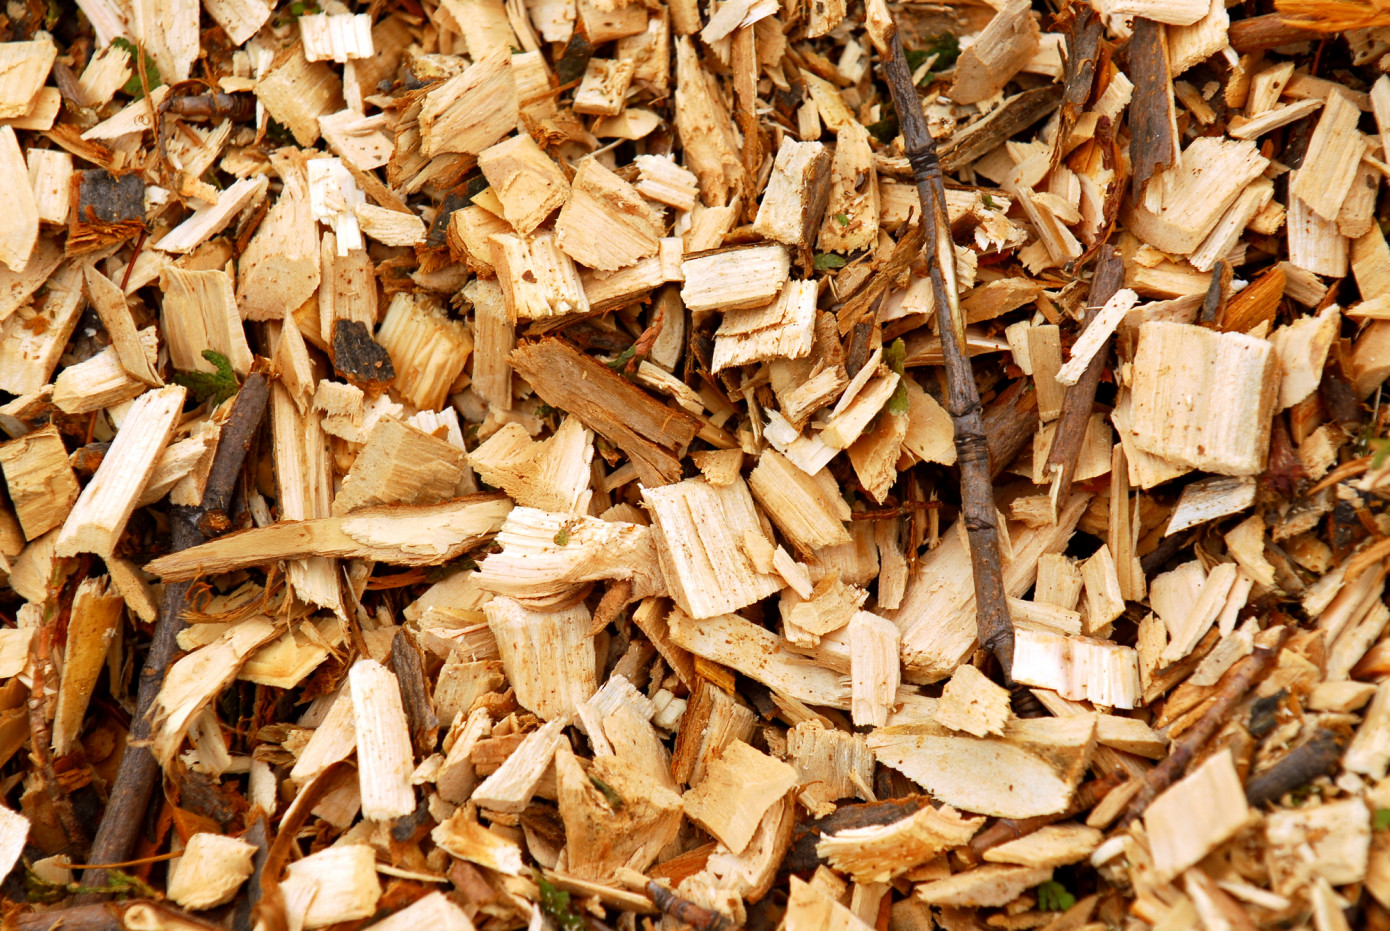 Imports of wood chips to China grow 46% in February